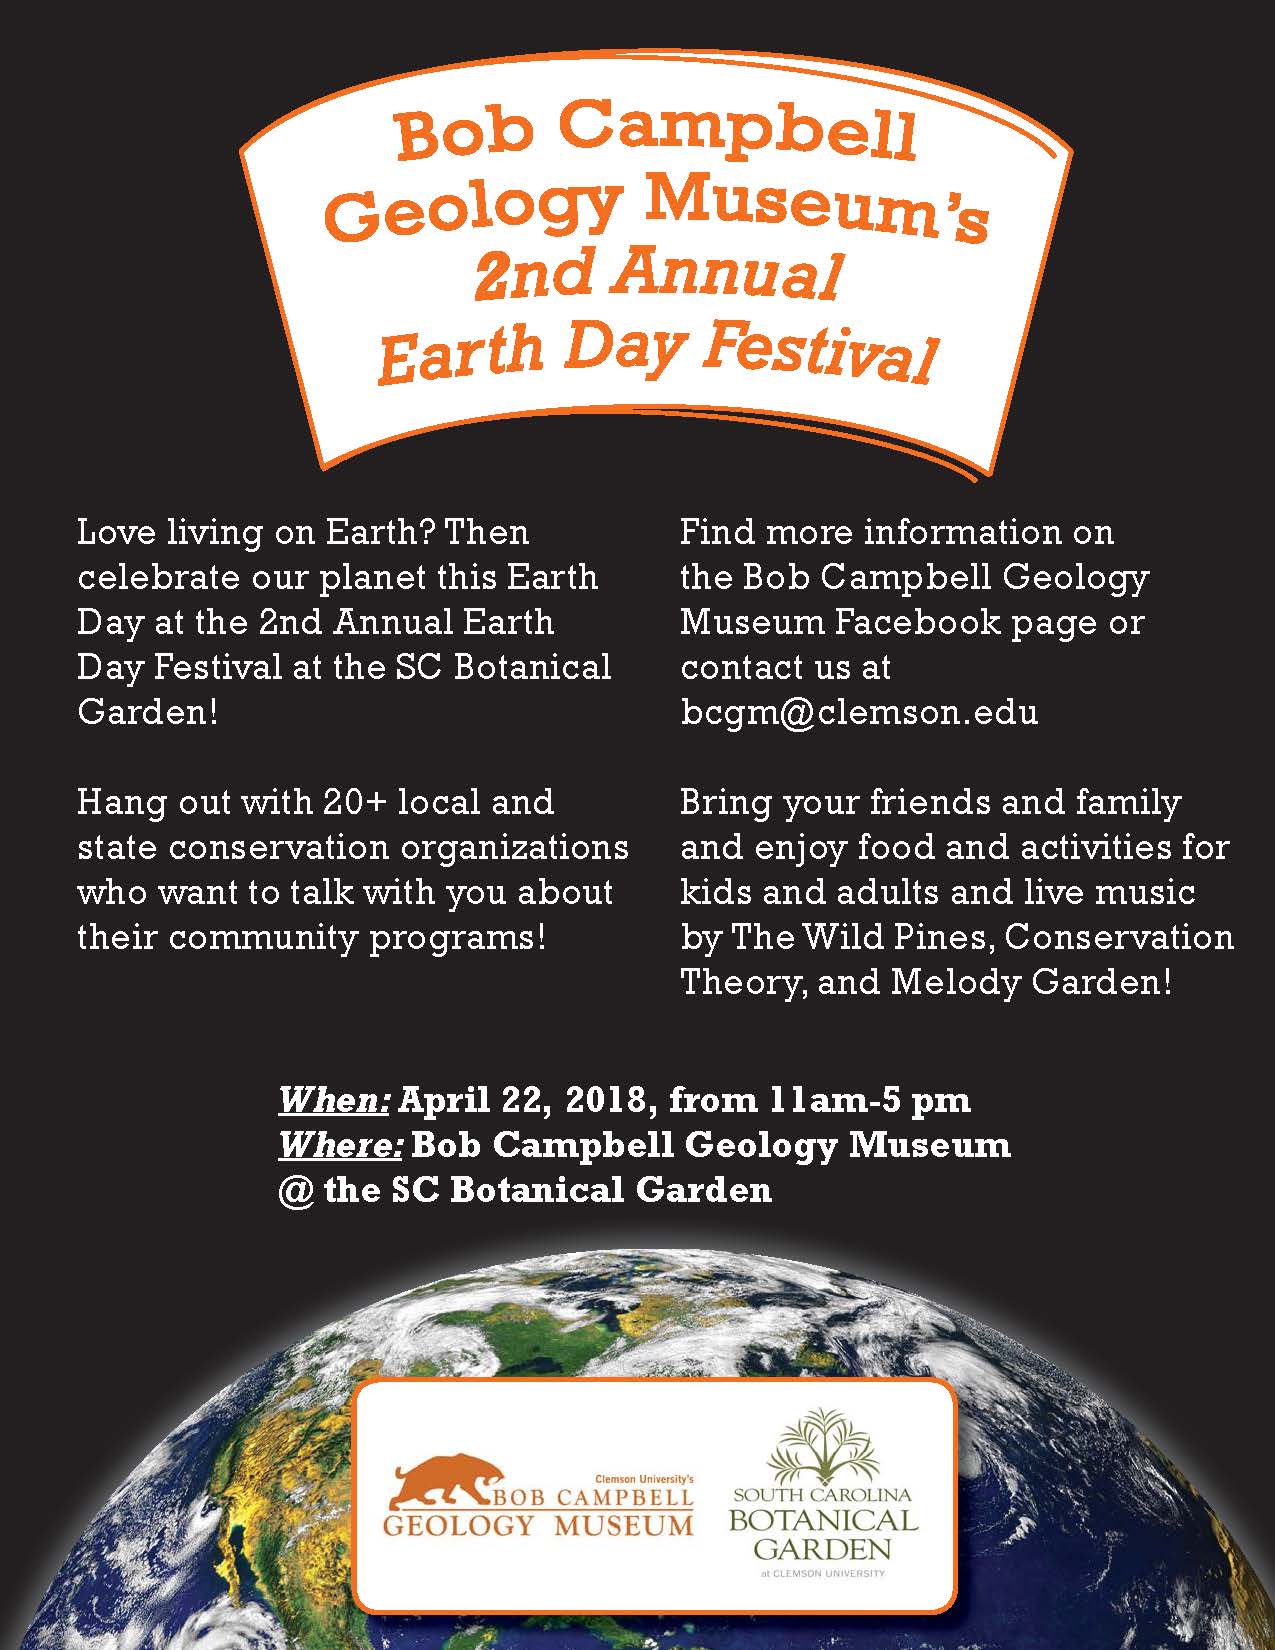 Earth Day Festival April 22nd 11am to 5pm Bob Campbell Geology Museum